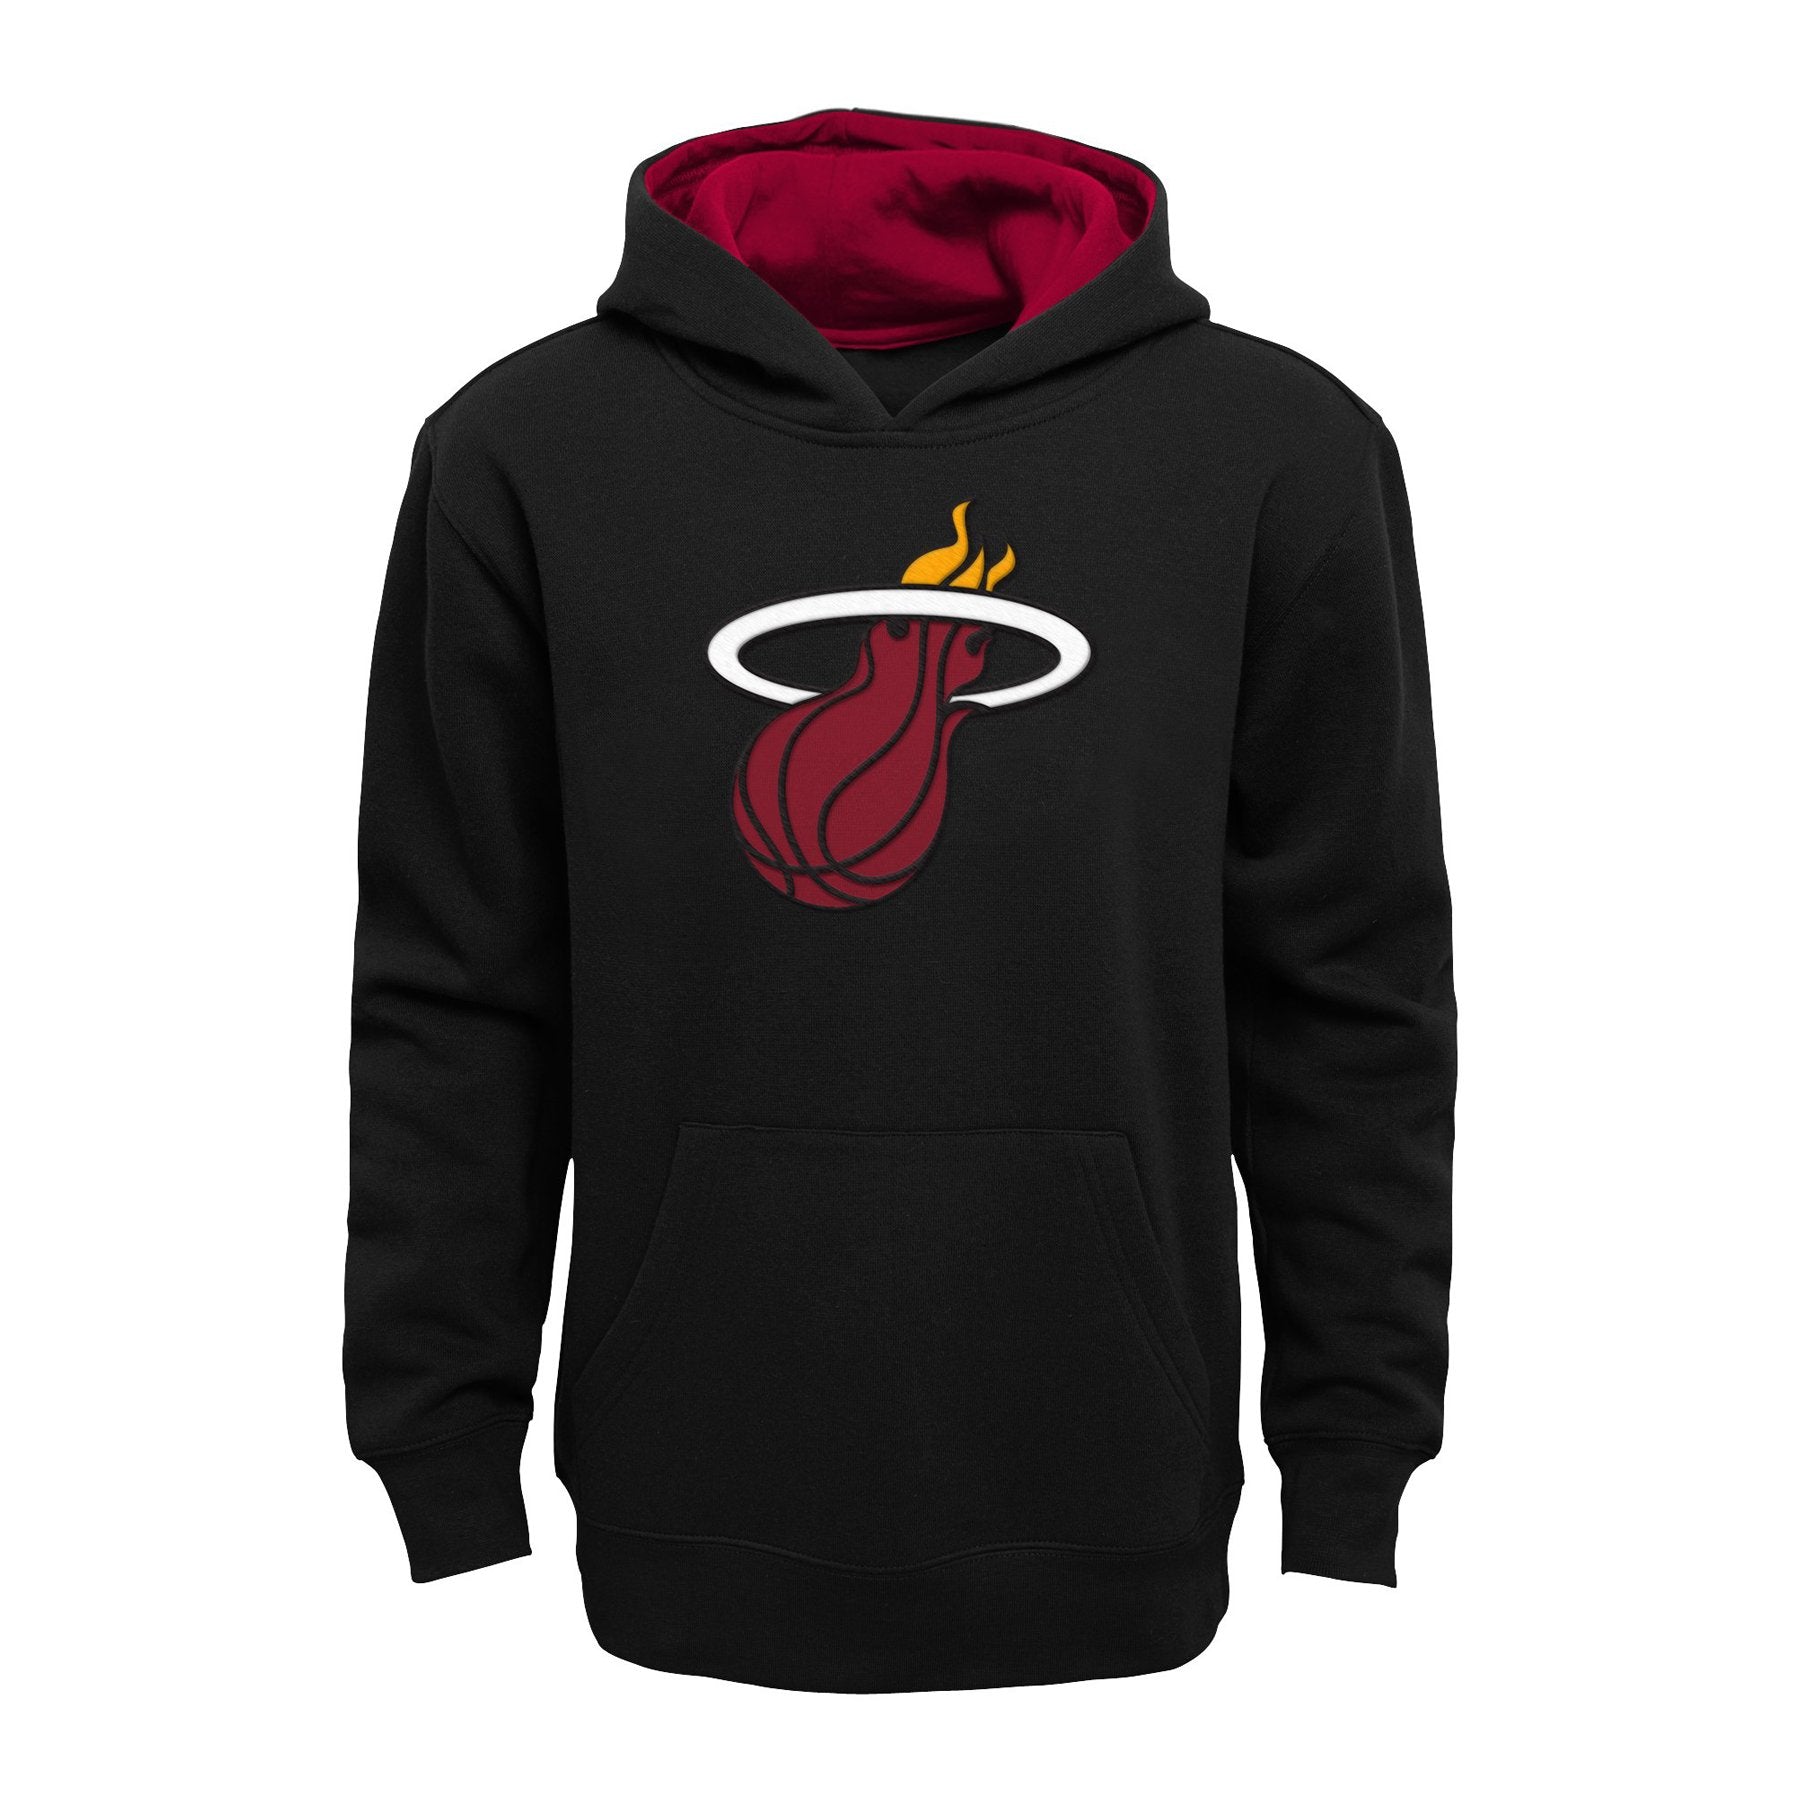 Miami Heat Youth Pullover Hoodie - Black